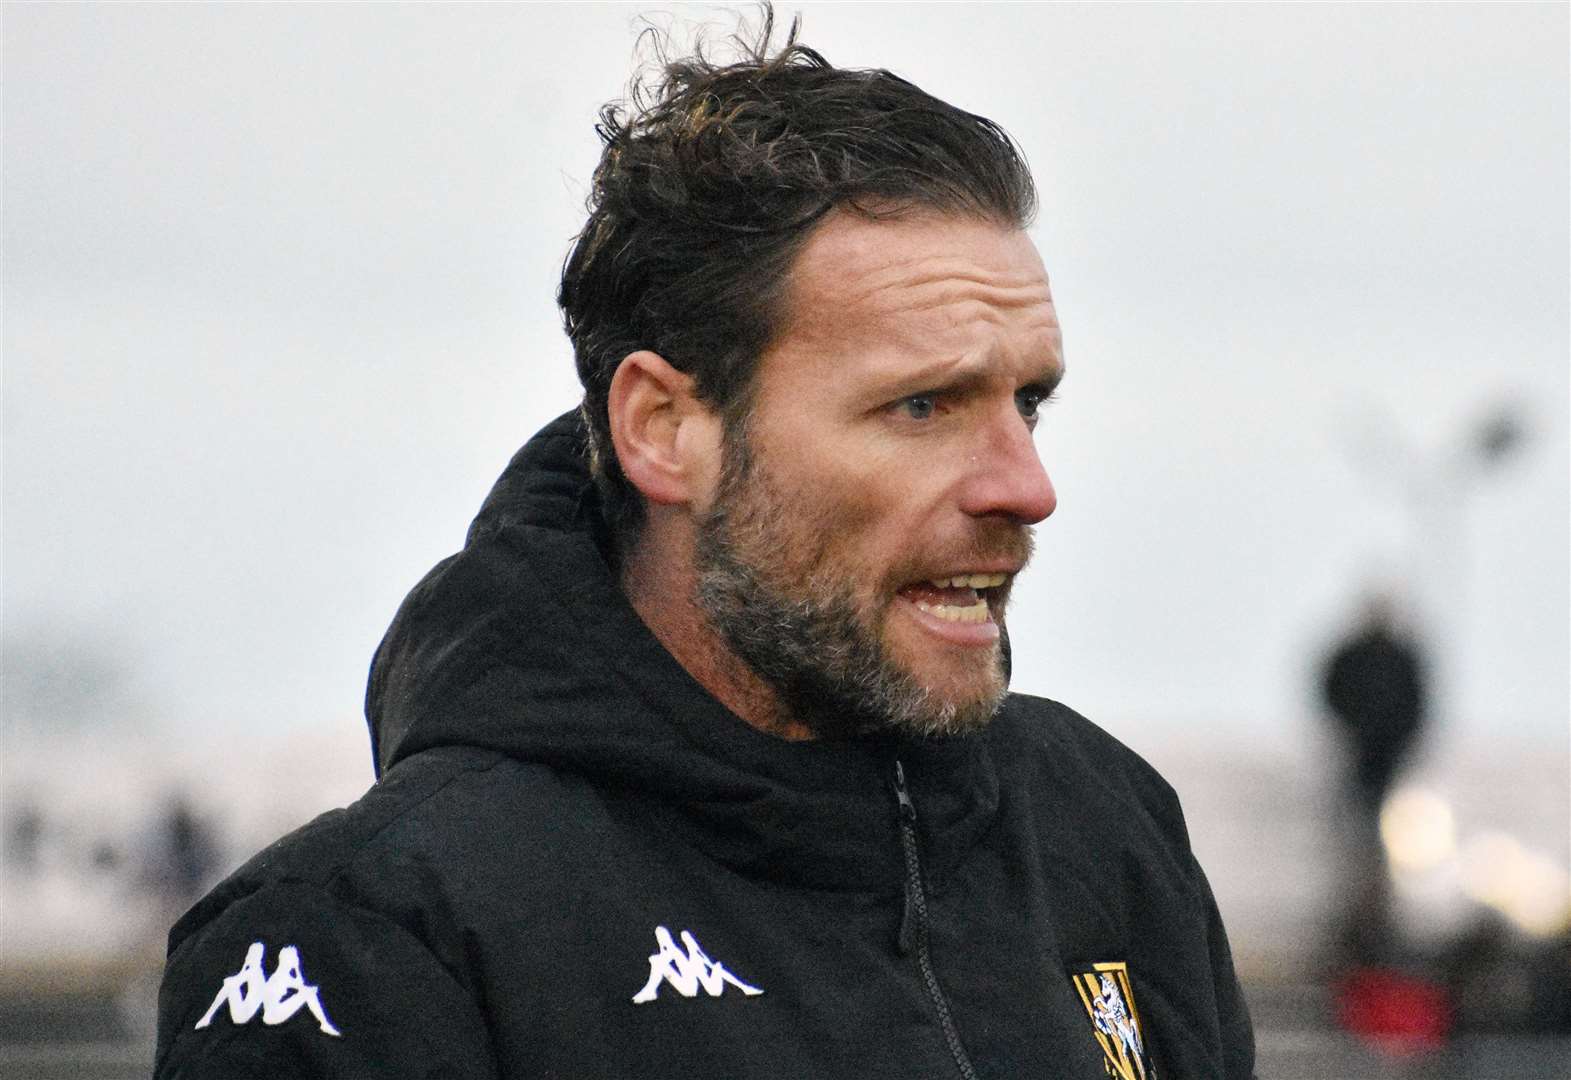 Folkestone manager Andy Drury is confident they won’t get dragged into trouble Picture: Randolph File